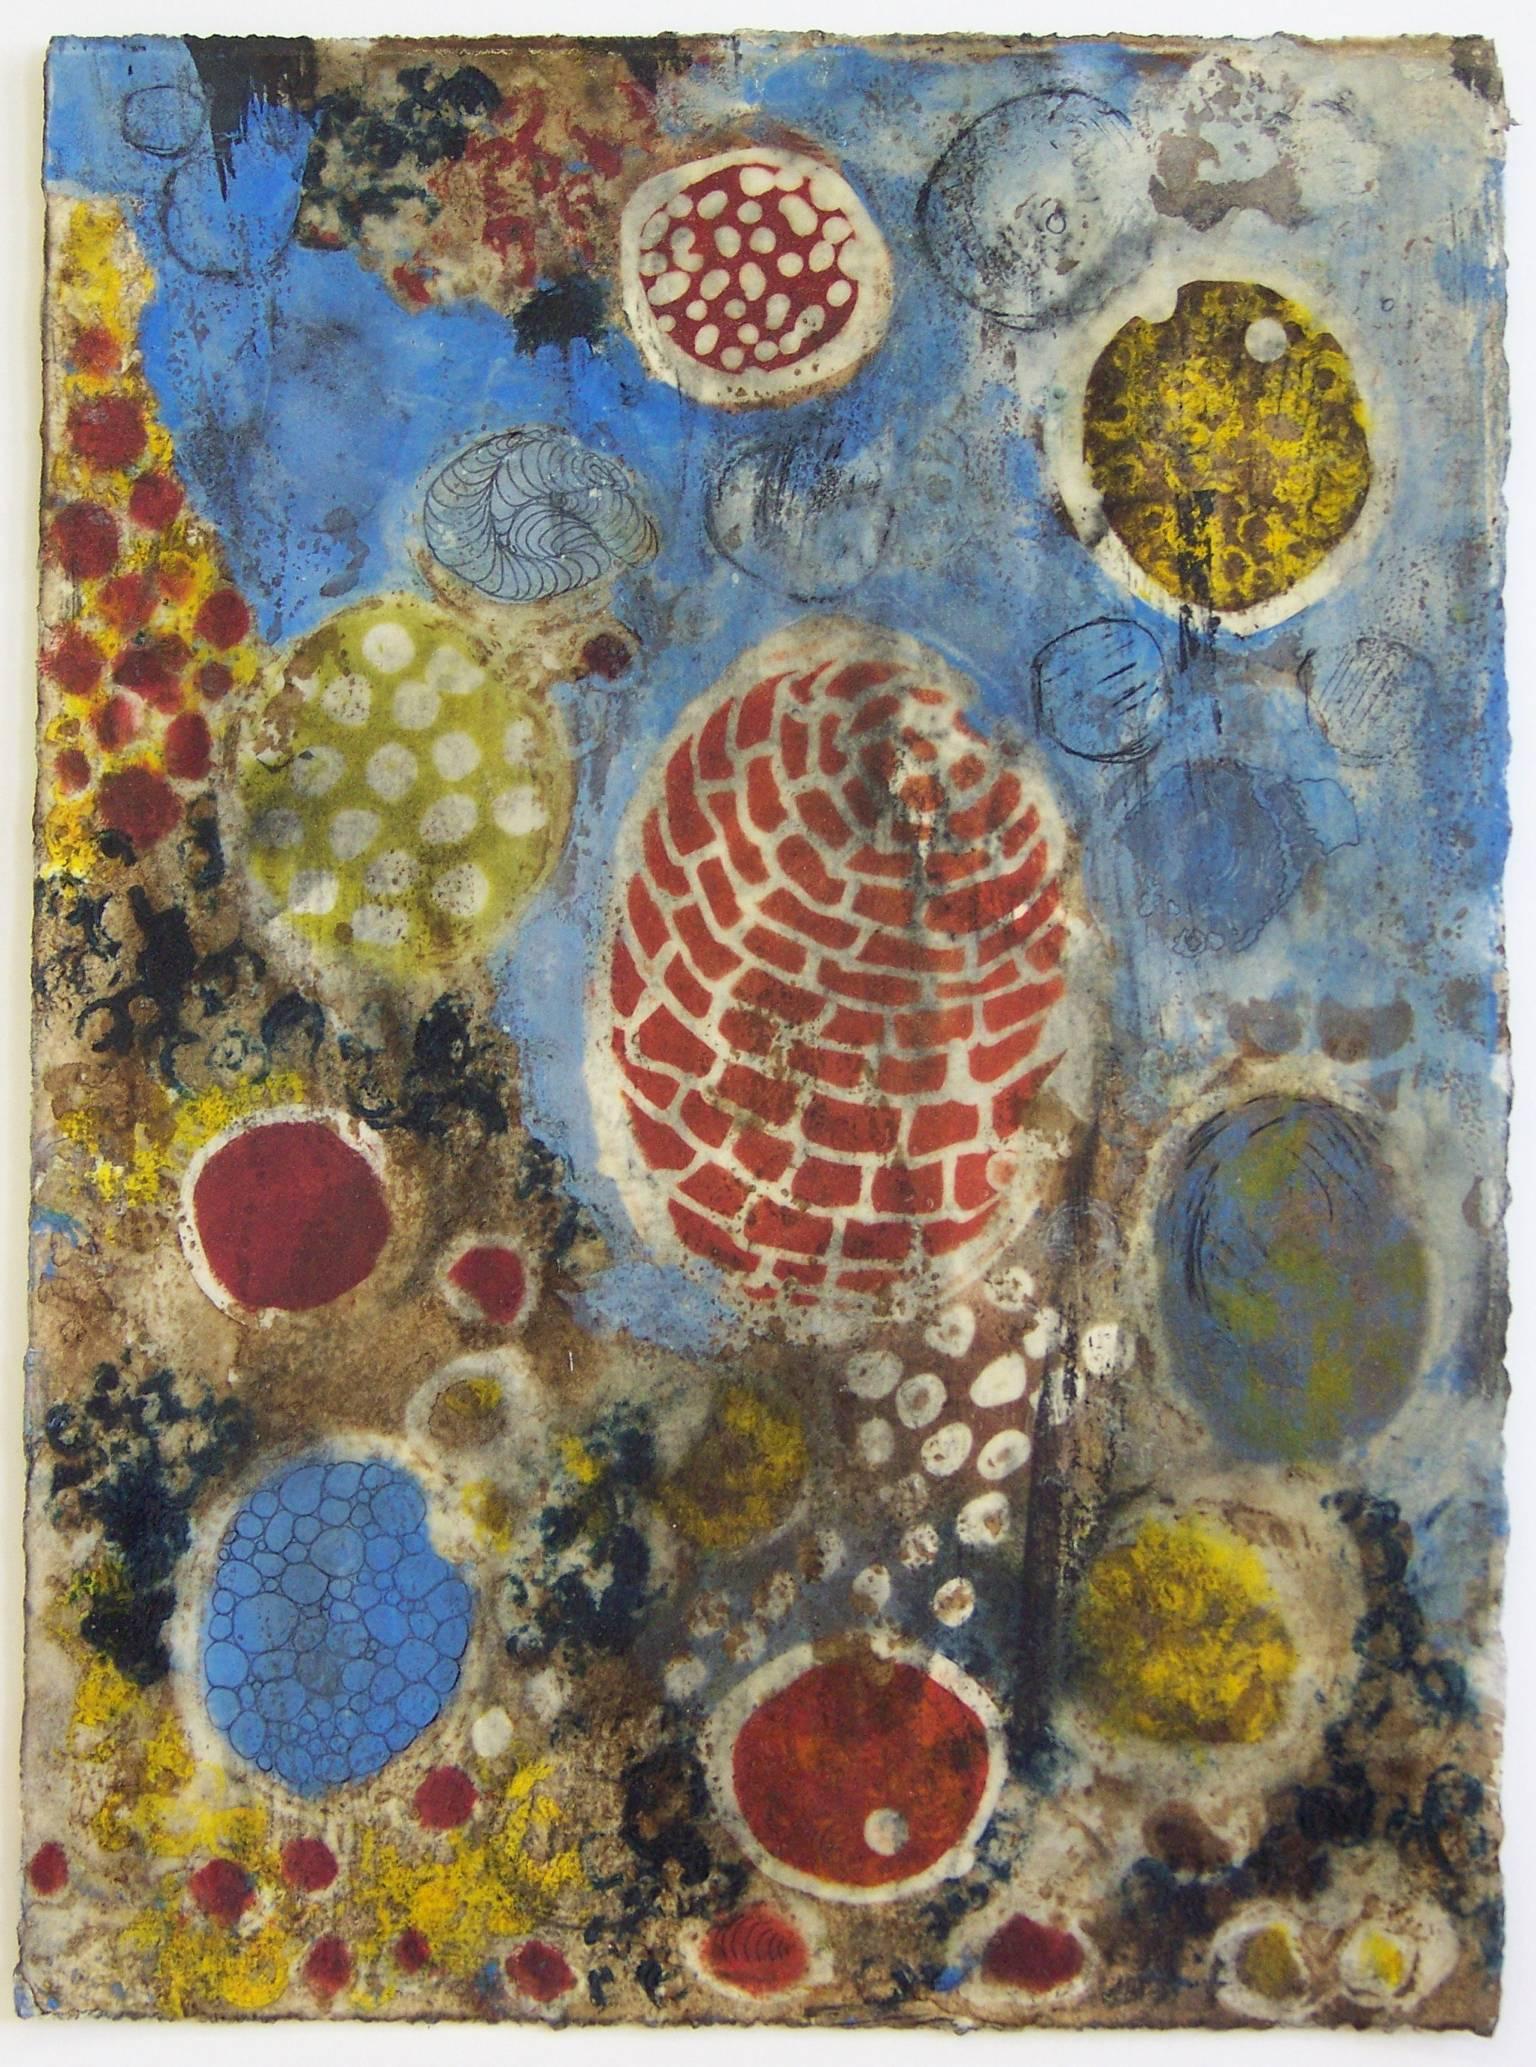 "Cosmology Sketch 1", abstract, red, blue, yellow, mixed media, drawing - Art by Denise Driscoll